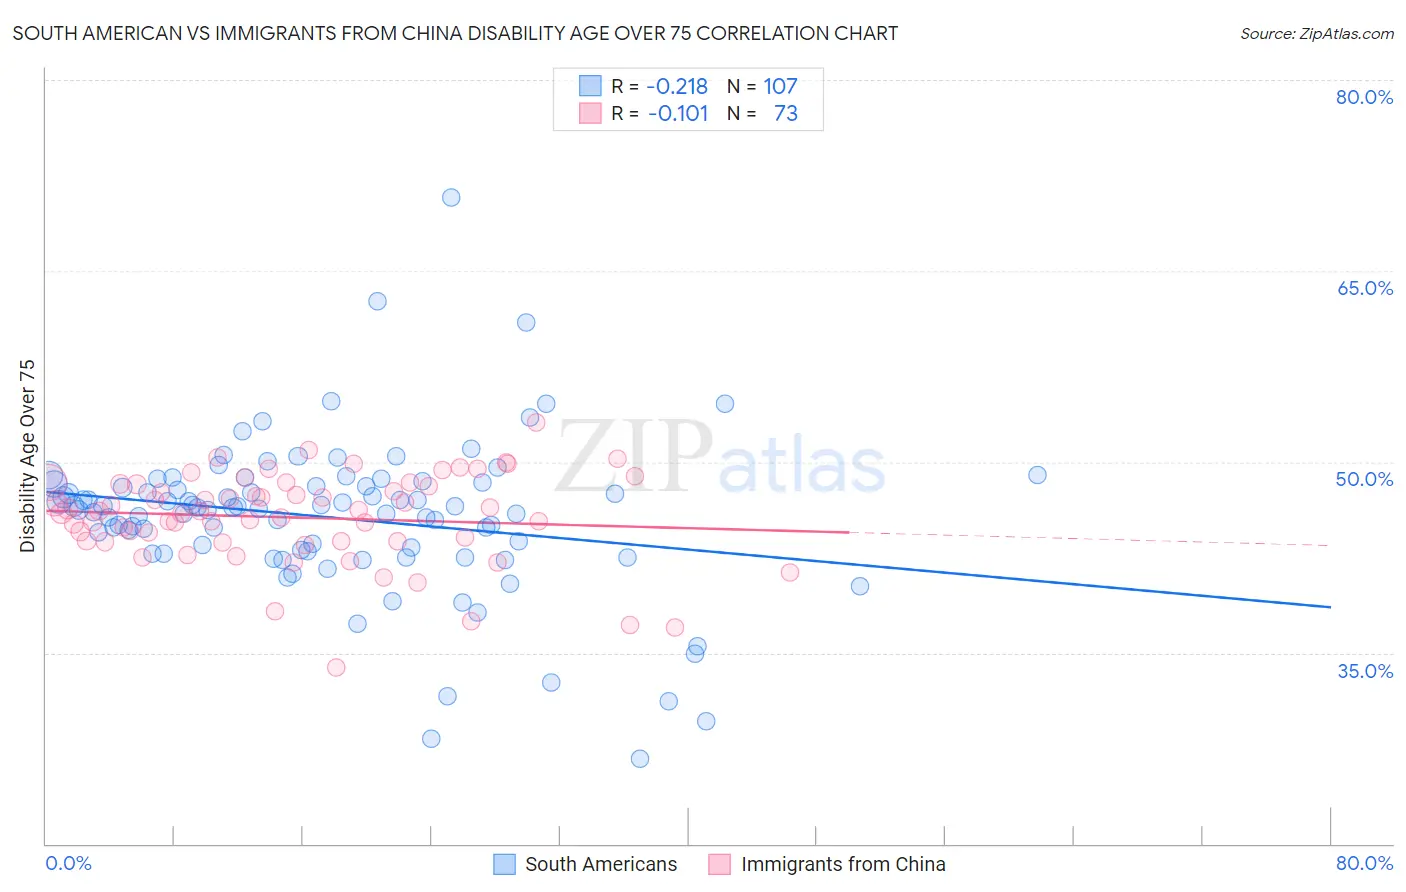 South American vs Immigrants from China Disability Age Over 75